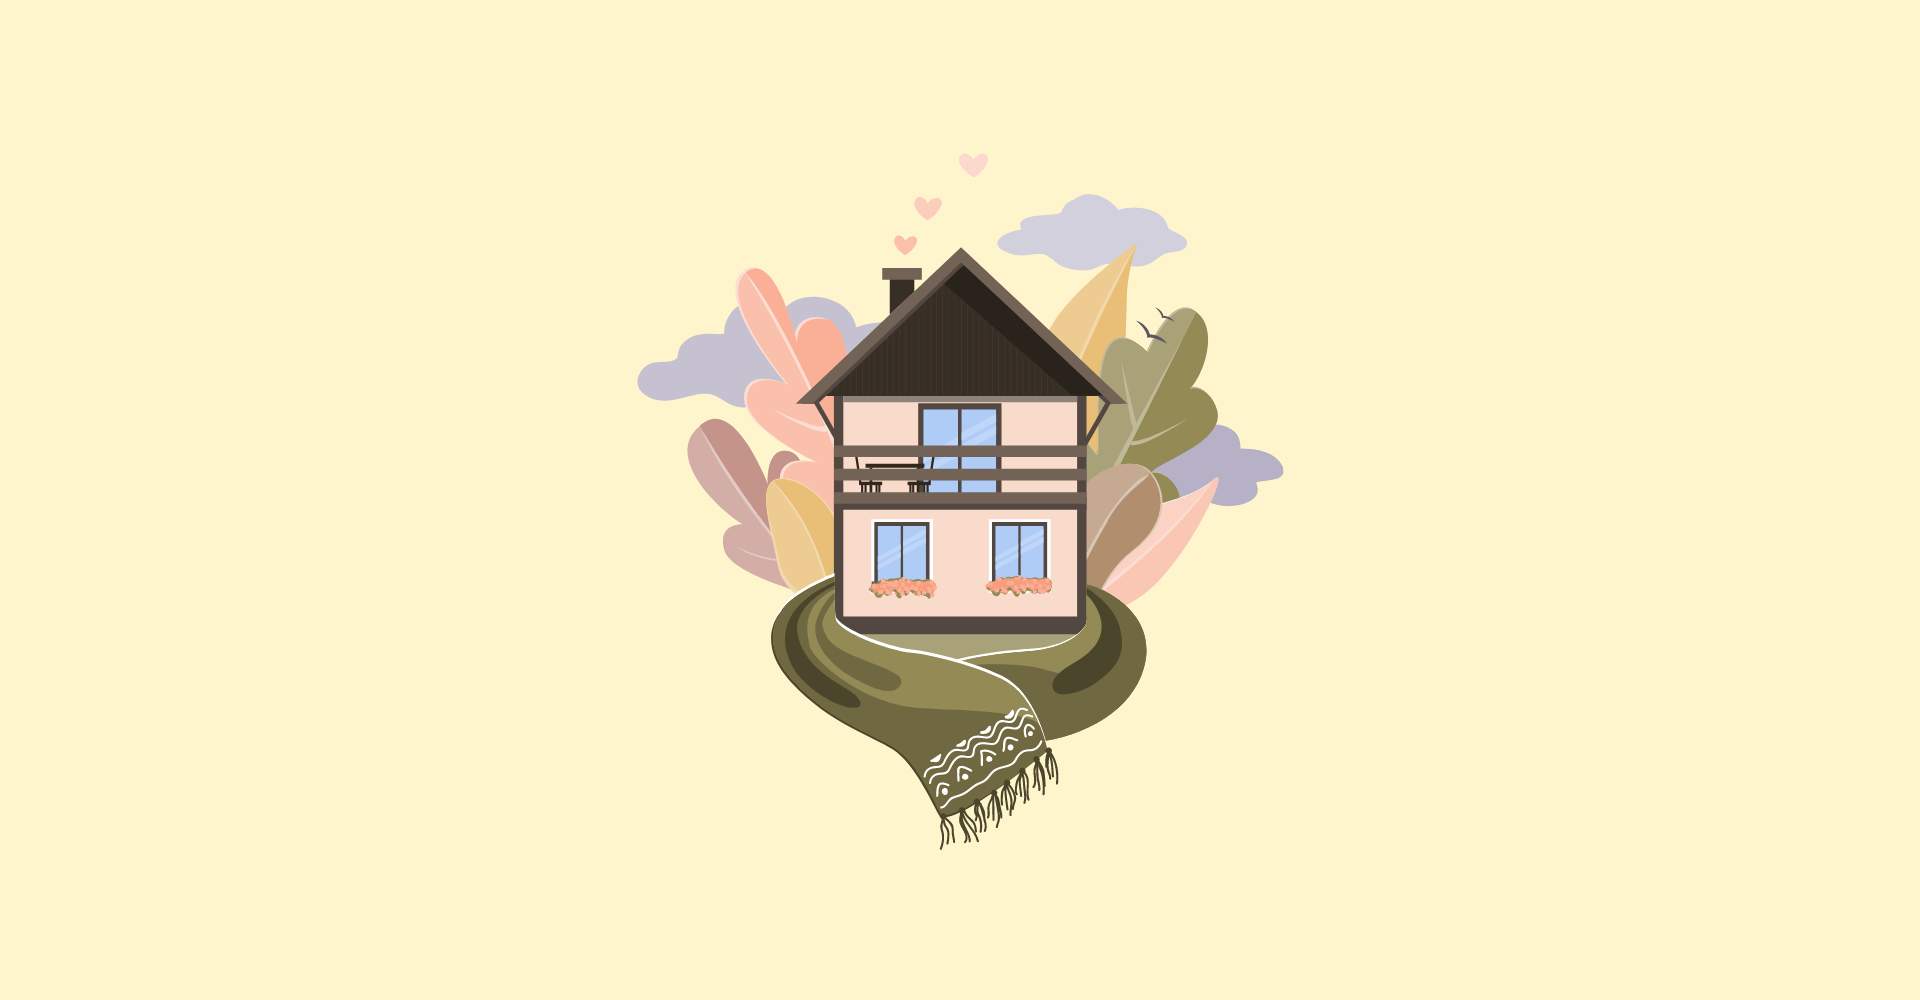 illustrated home with flowers and clouds floating on yellow background for best housewarming gifts list